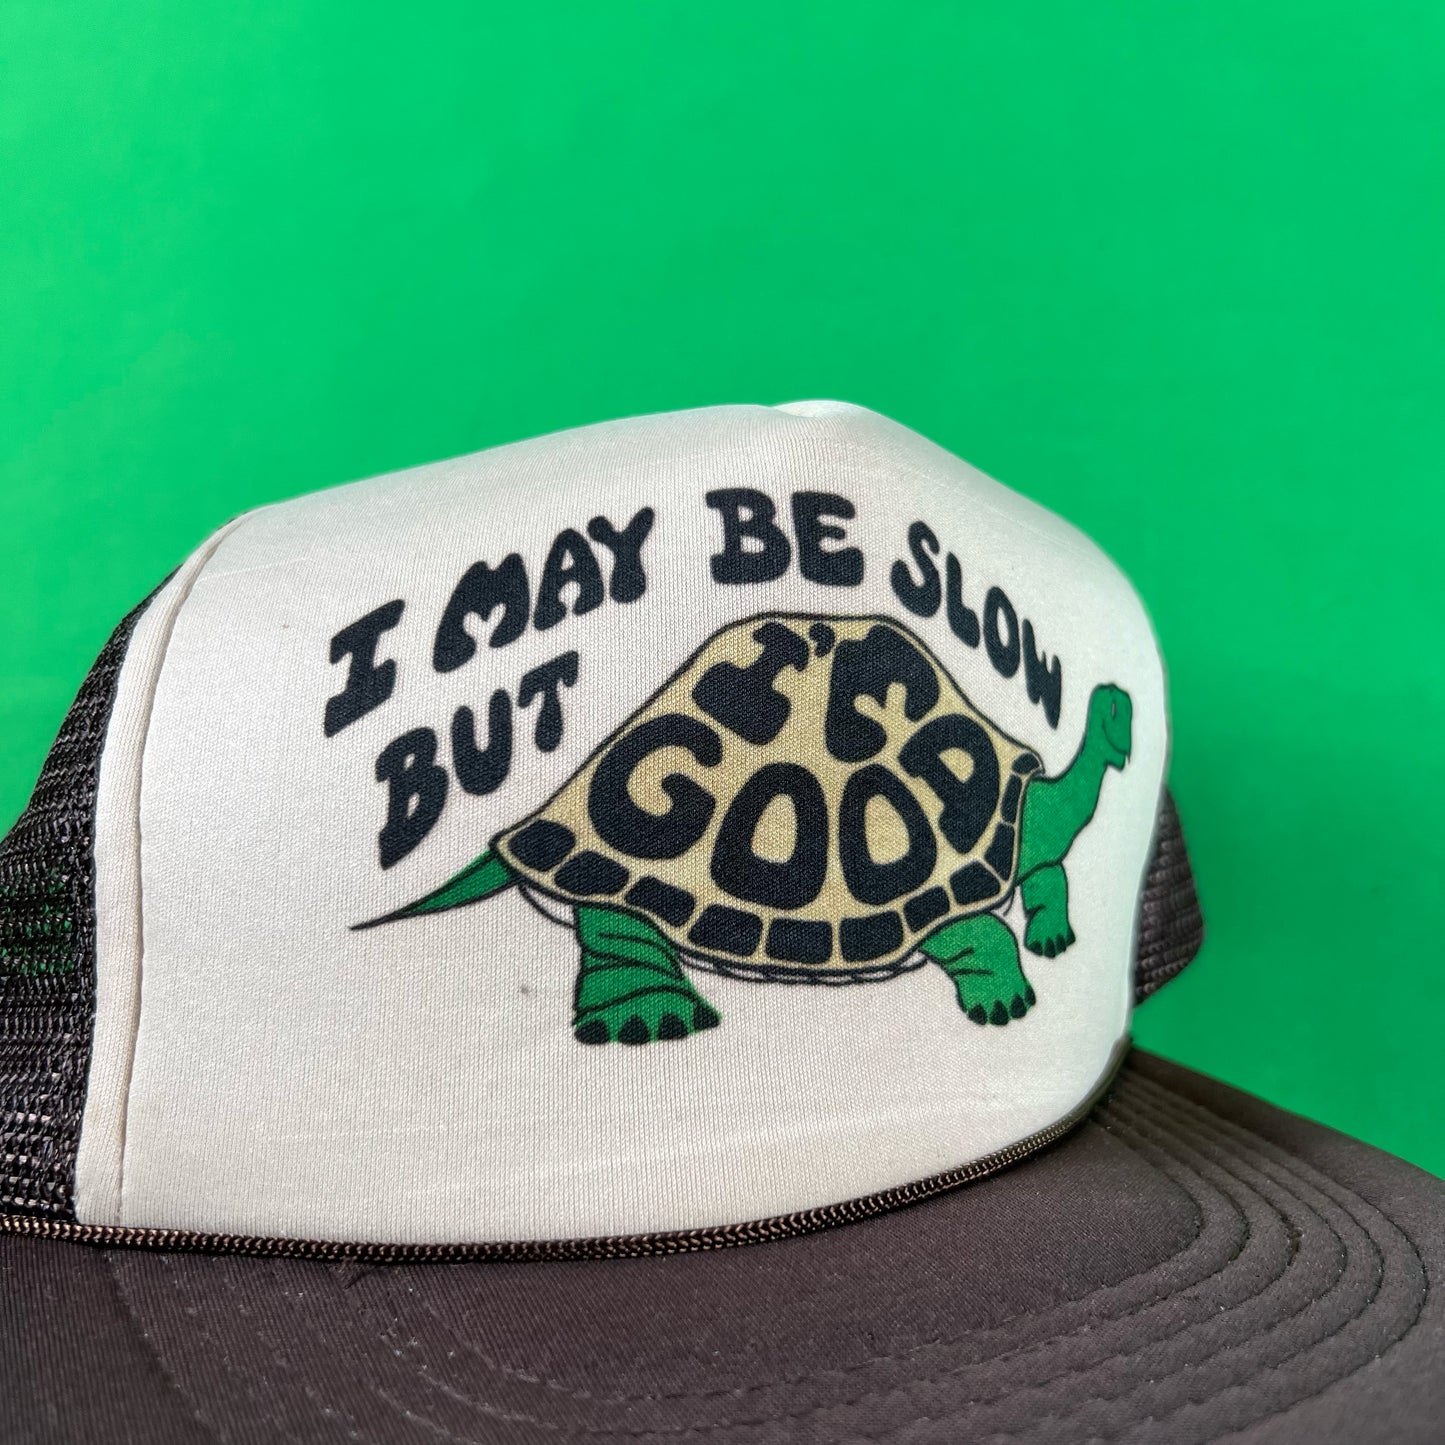 80s Slow and Steady Wins the Race Trucker Hat